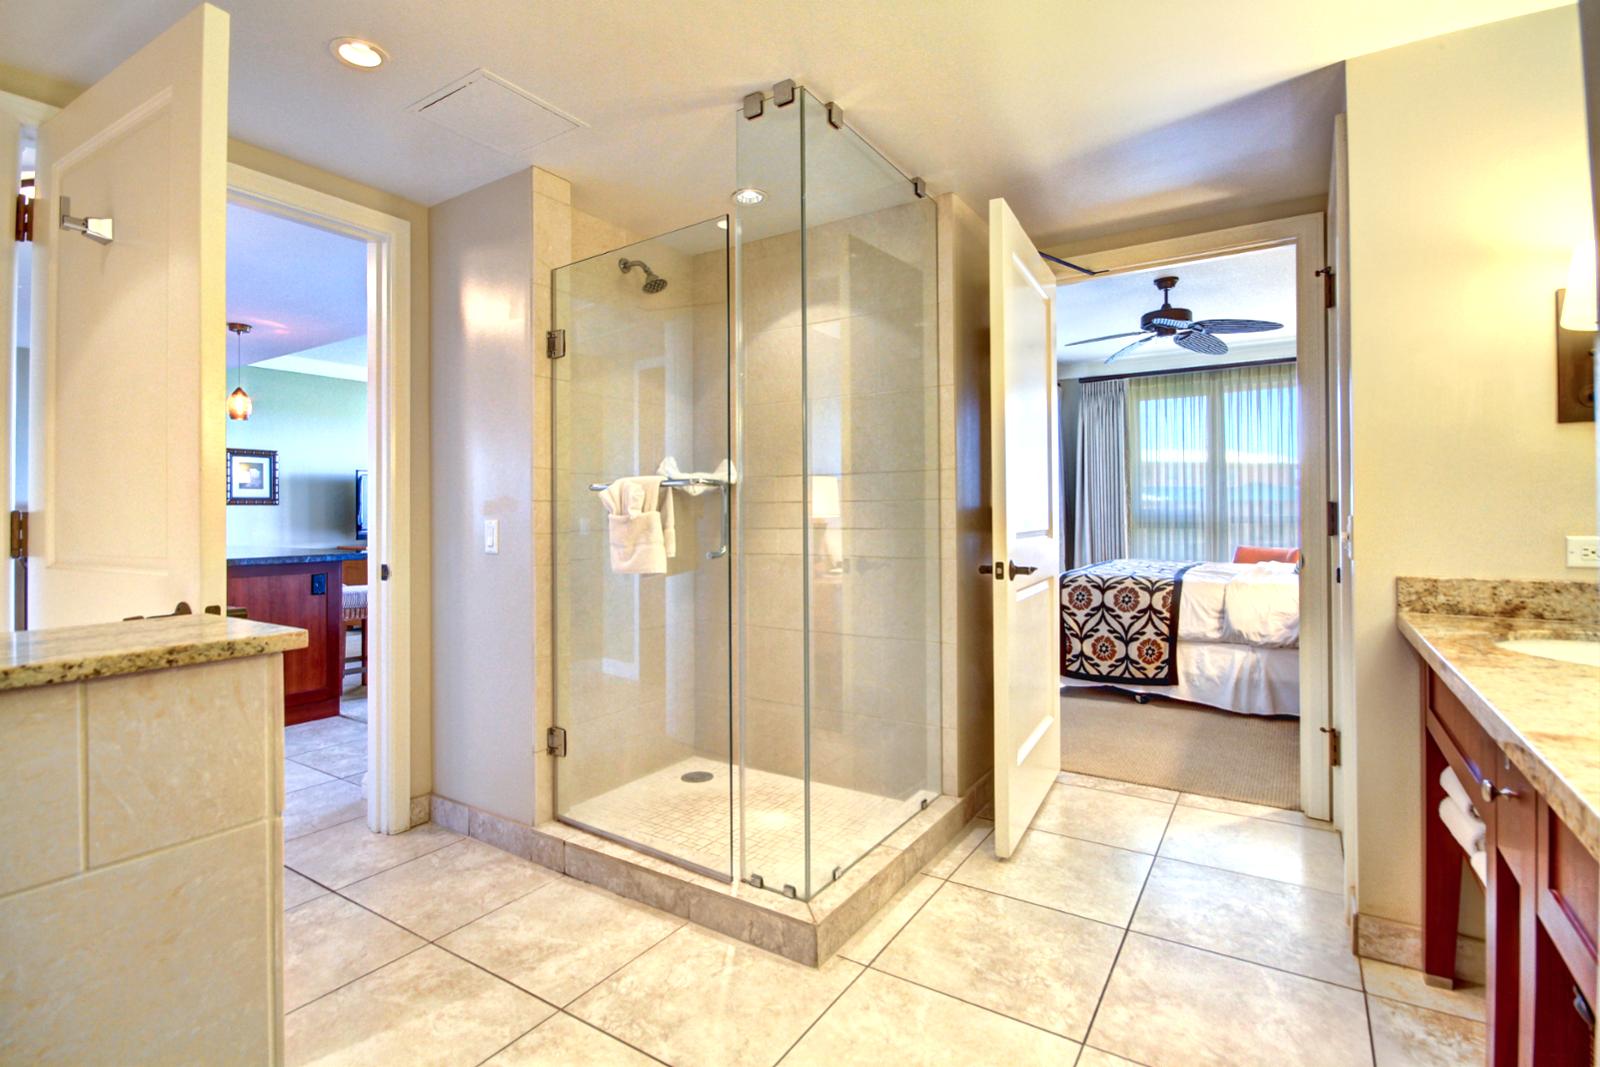 Separate bathtub and shower. 